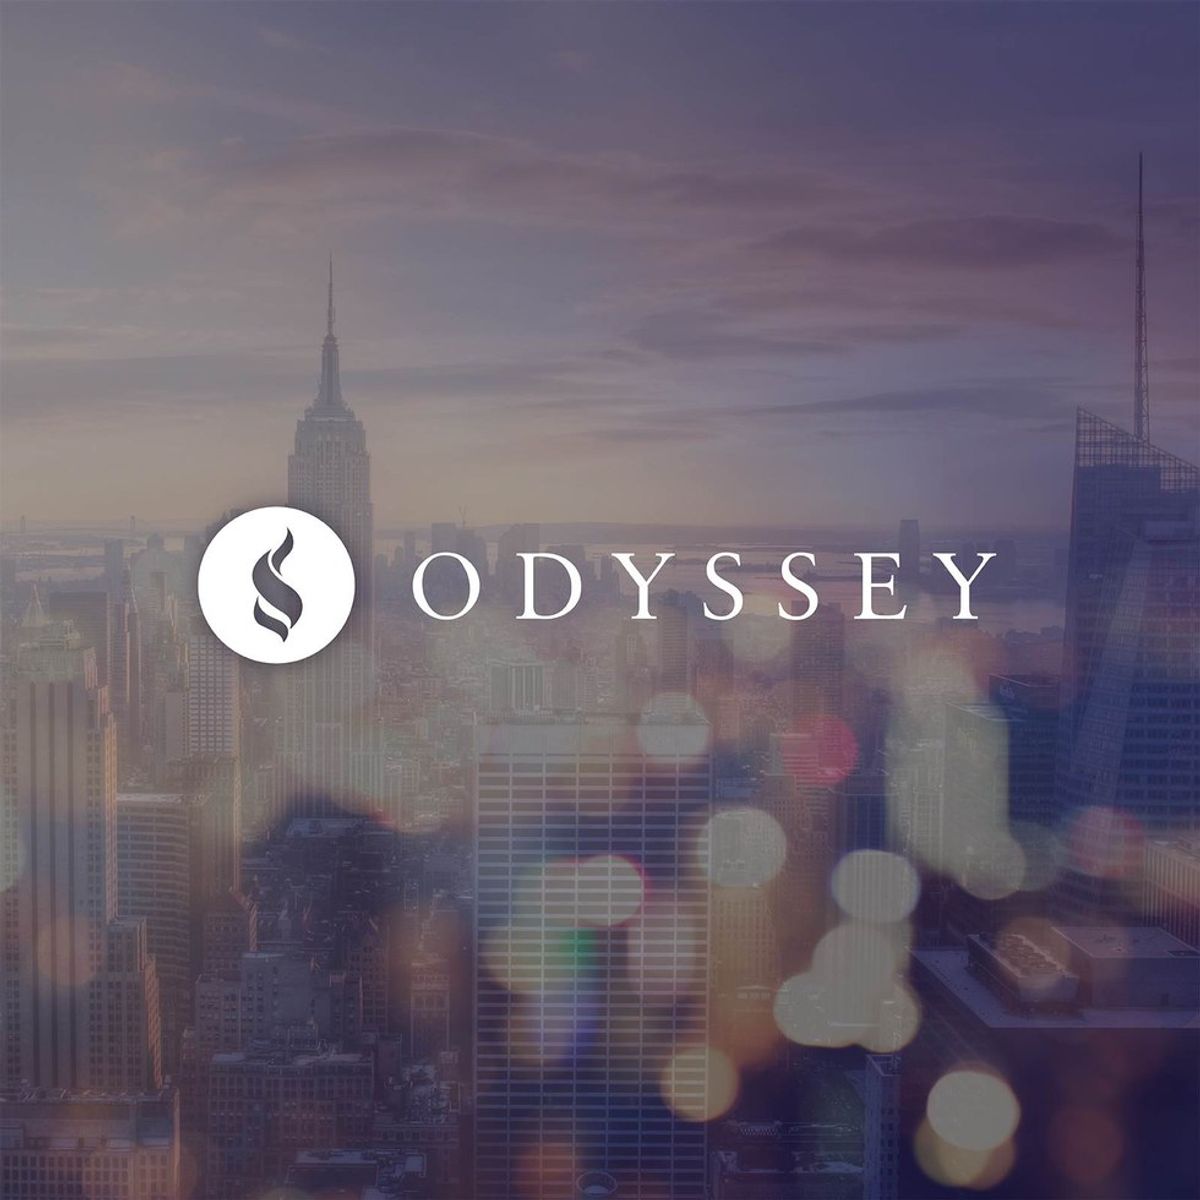 Why I Decided To Become a Part of the Odyssey Online